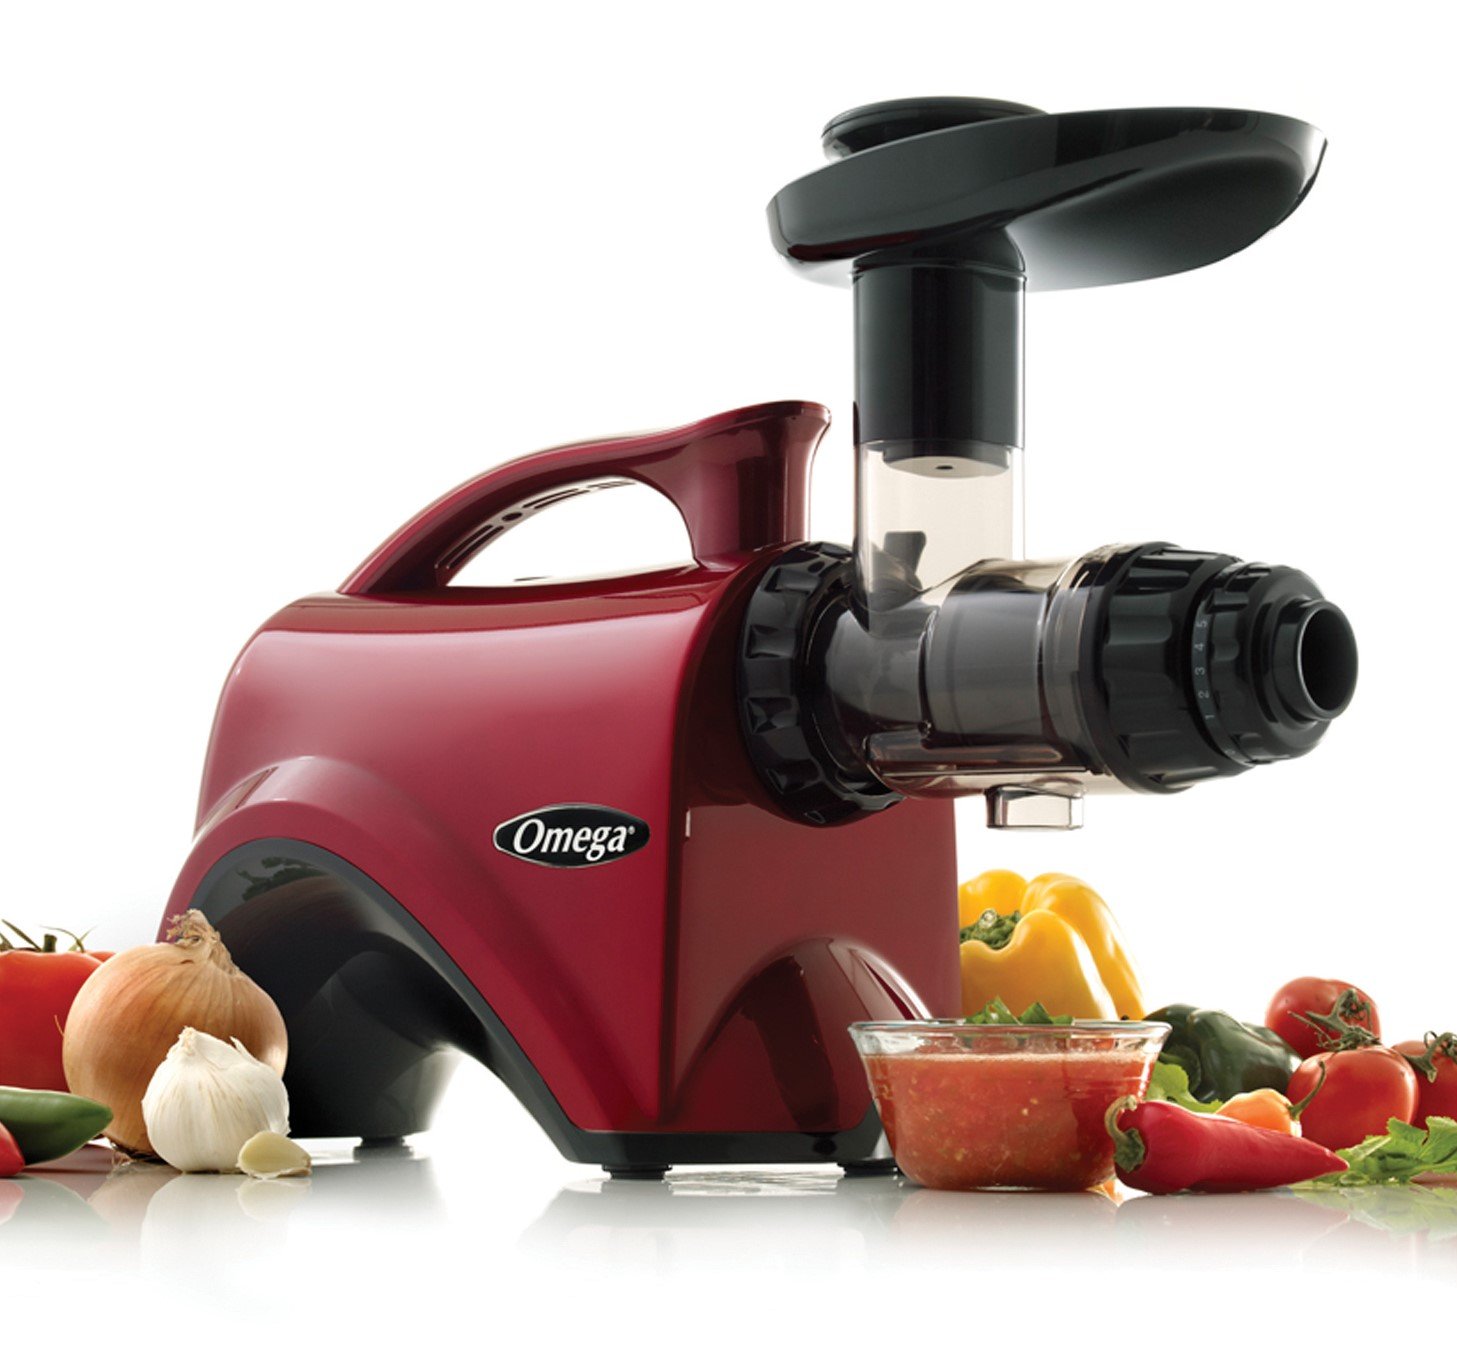 What Is The Best Omega Juicer